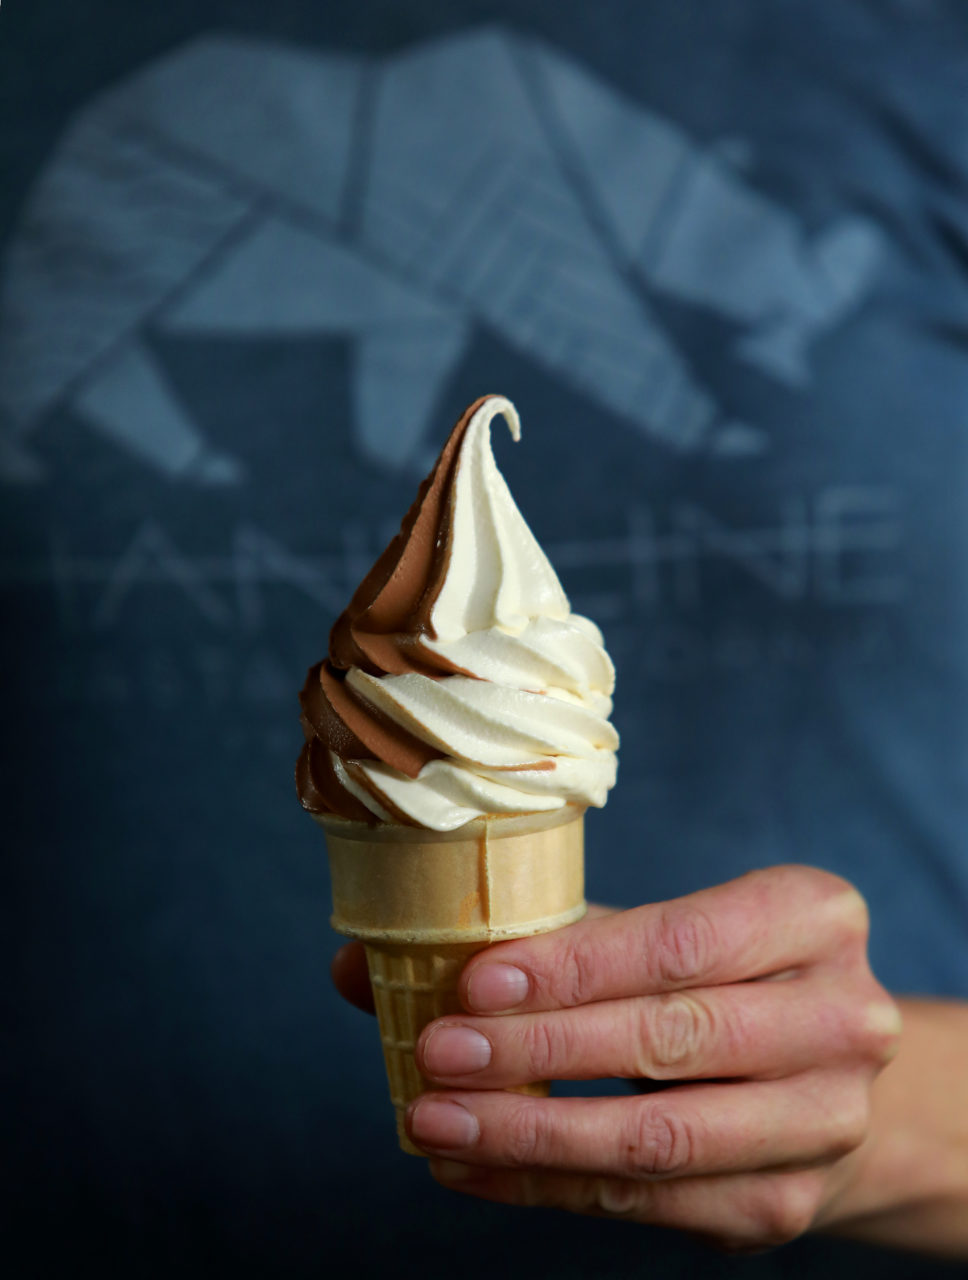 Handline was built on the site of the old Foster's Freeze in Sebastopol and they continue to keep soft serve ice cream on the menu. (John Burgess/The Press Democrat)